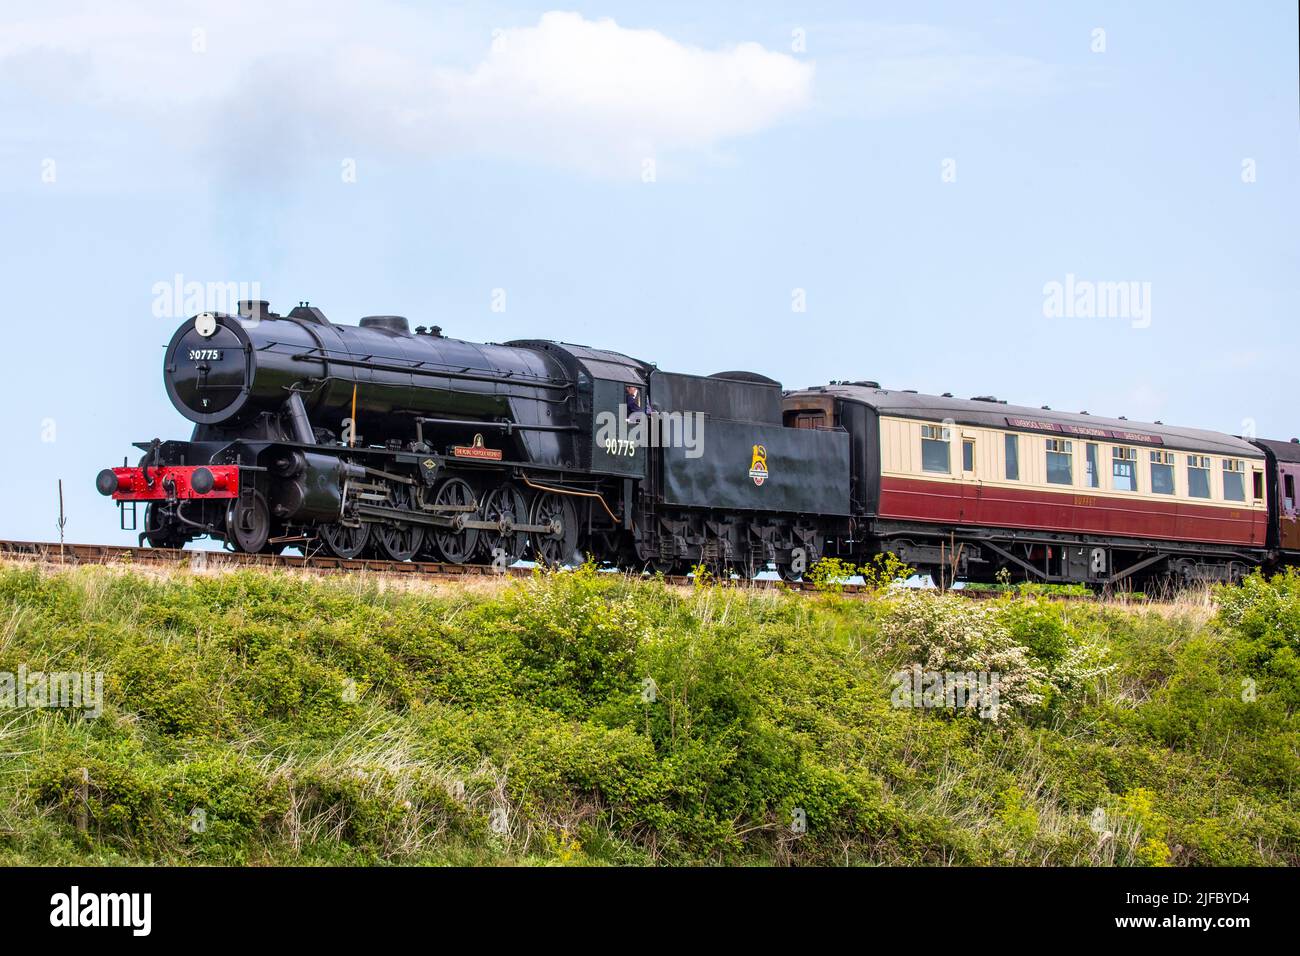 Sheringham, UK - May 16th 2022: A steam train running on the North Norfolk Railway line, also known as the Poppy Line, pictured near the town of Sheri Stock Photo